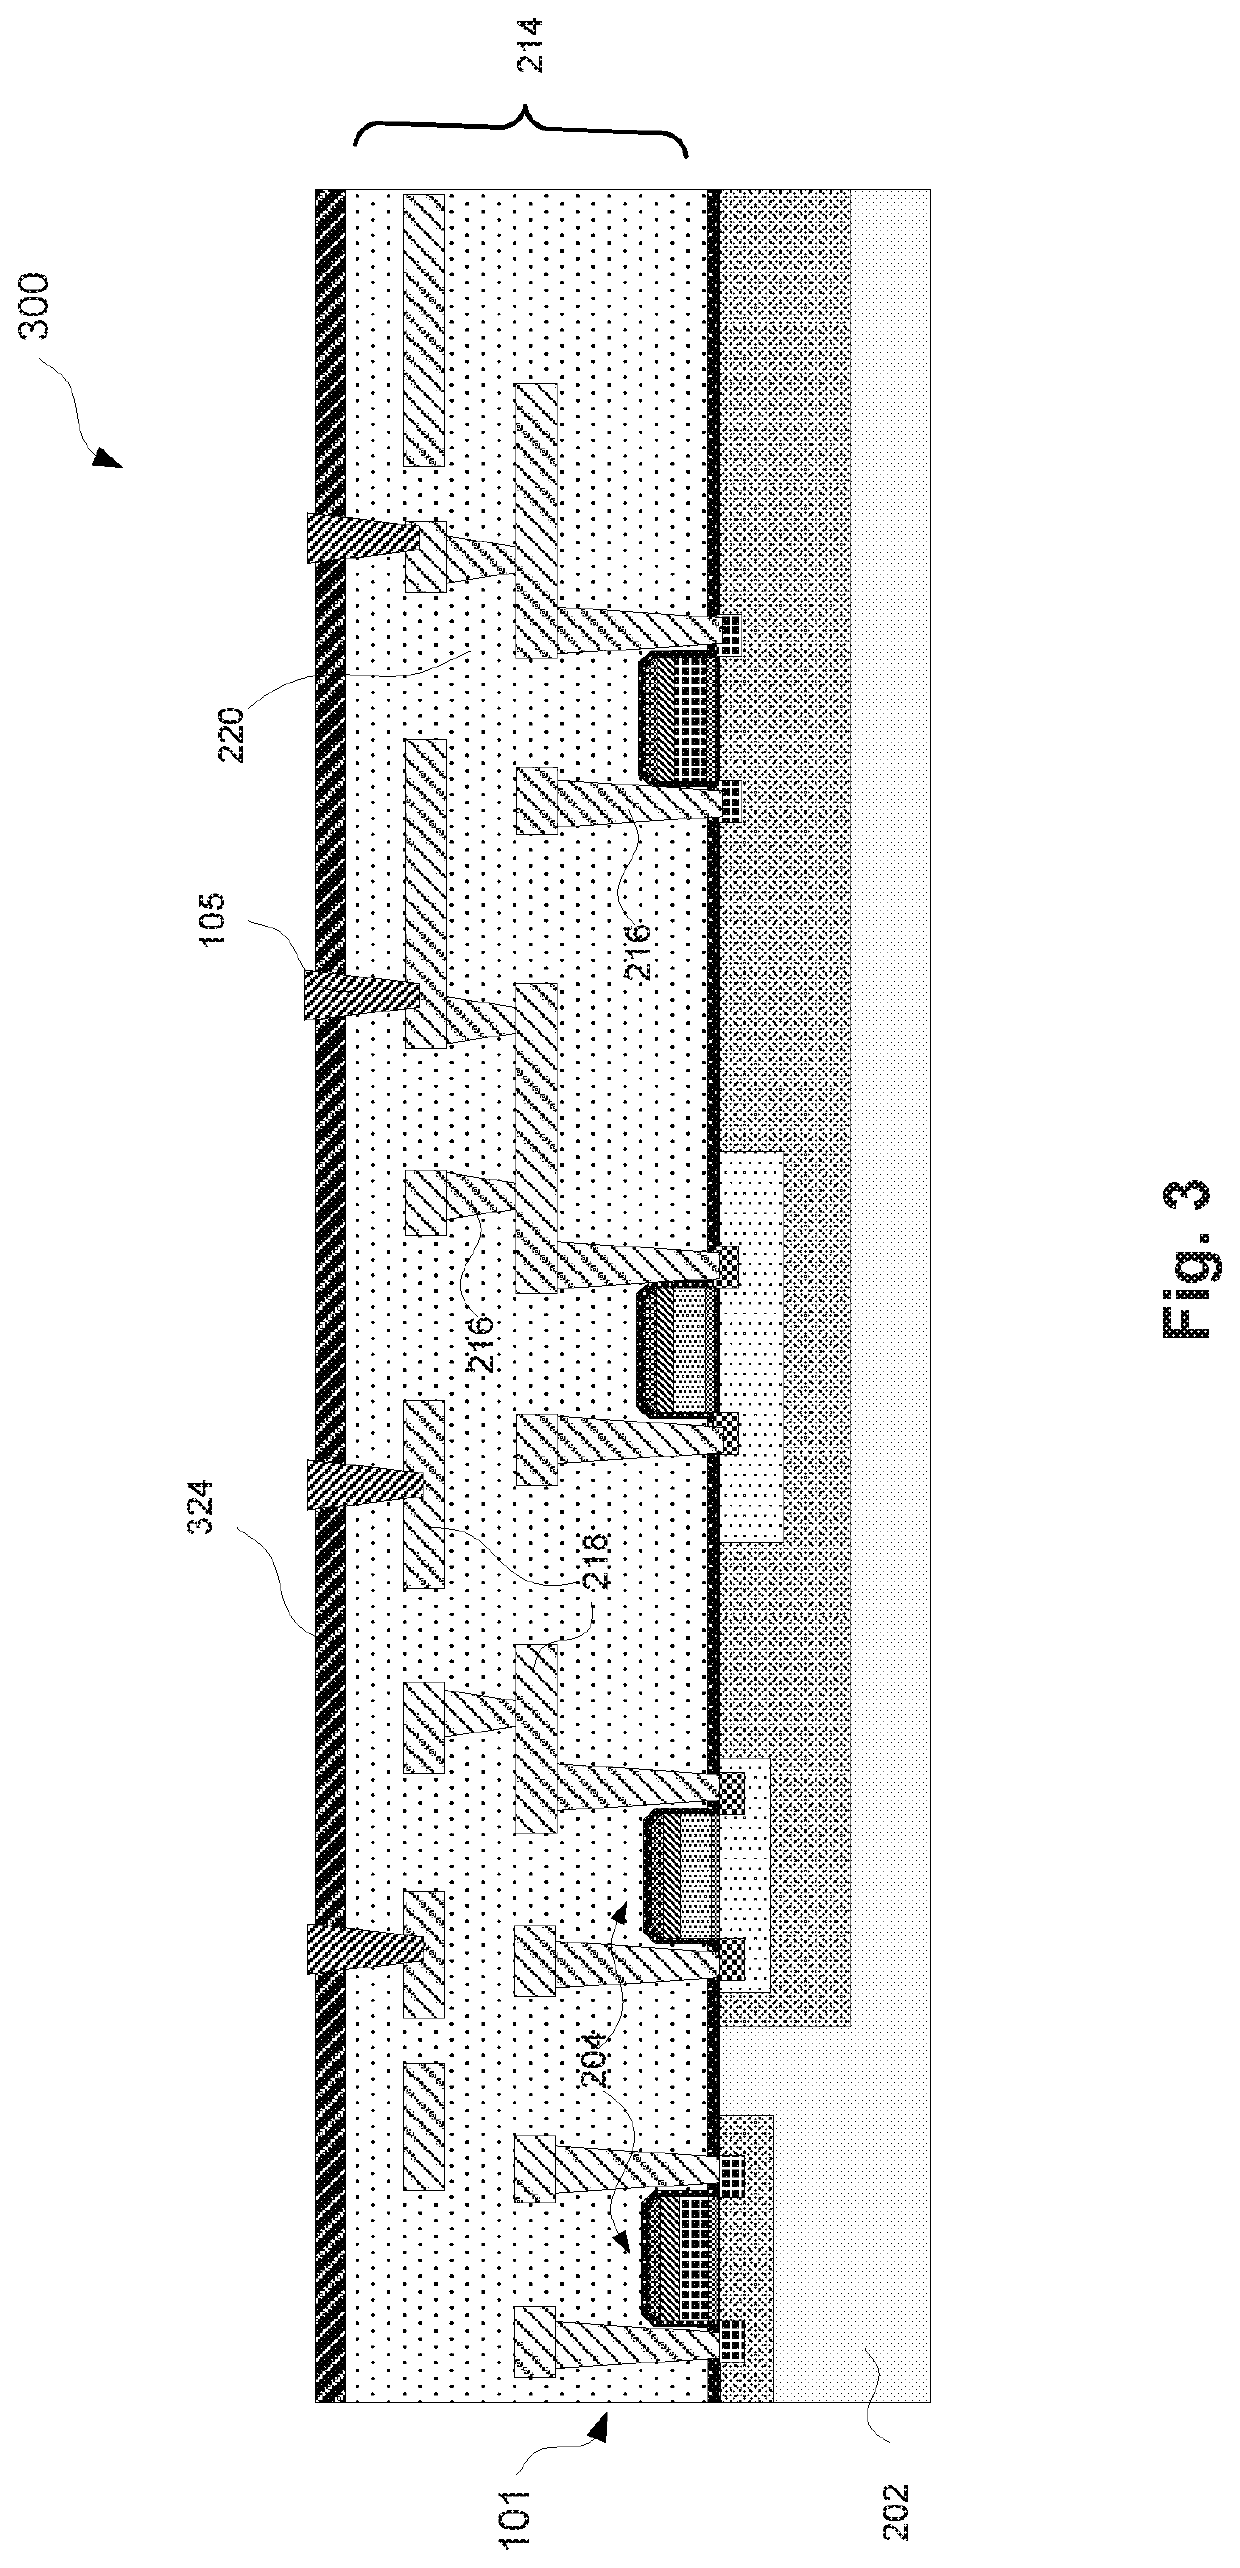 Integration of three-dimensional NAND memory devices with multiple functional chips